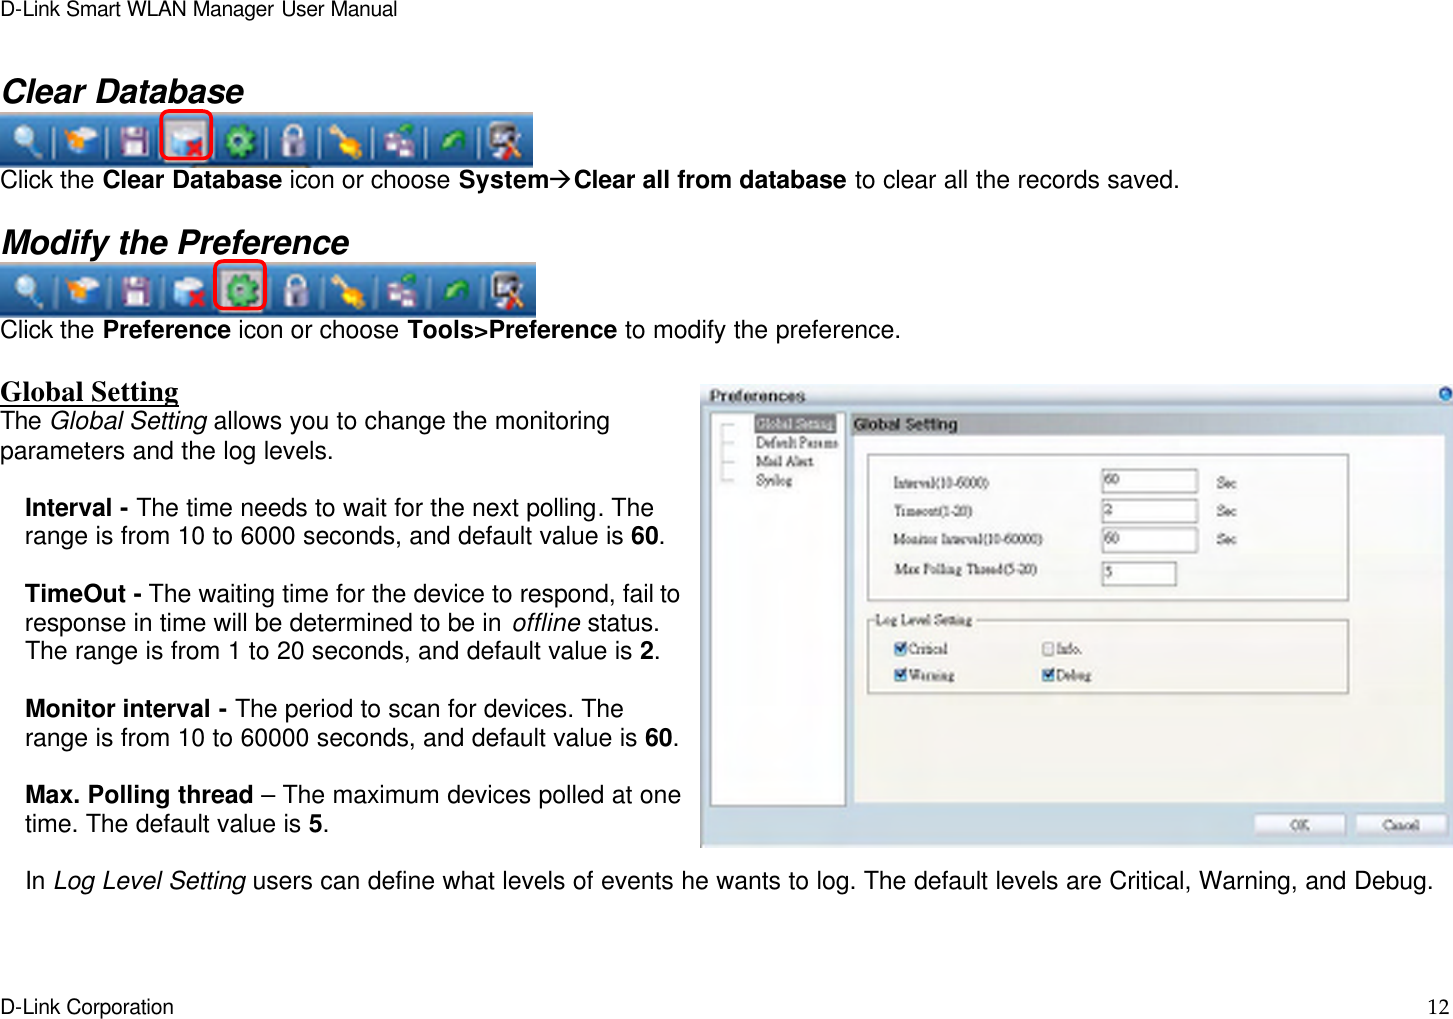 D-Link Smart WLAN Manager User Manual  D-Link Corporation    12   Clear Database  Click the Clear Database icon or choose SystemàClear all from database to clear all the records saved.  Modify the Preference  Click the Preference icon or choose Tools&gt;Preference to modify the preference.    Global Setting The Global Setting allows you to change the monitoring parameters and the log levels.  Interval - The time needs to wait for the next polling. The range is from 10 to 6000 seconds, and default value is 60.  TimeOut - The waiting time for the device to respond, fail to response in time will be determined to be in offline status. The range is from 1 to 20 seconds, and default value is 2.  Monitor interval - The period to scan for devices. The range is from 10 to 60000 seconds, and default value is 60.  Max. Polling thread – The maximum devices polled at one time. The default value is 5.  In Log Level Setting users can define what levels of events he wants to log. The default levels are Critical, Warning, and Debug.   